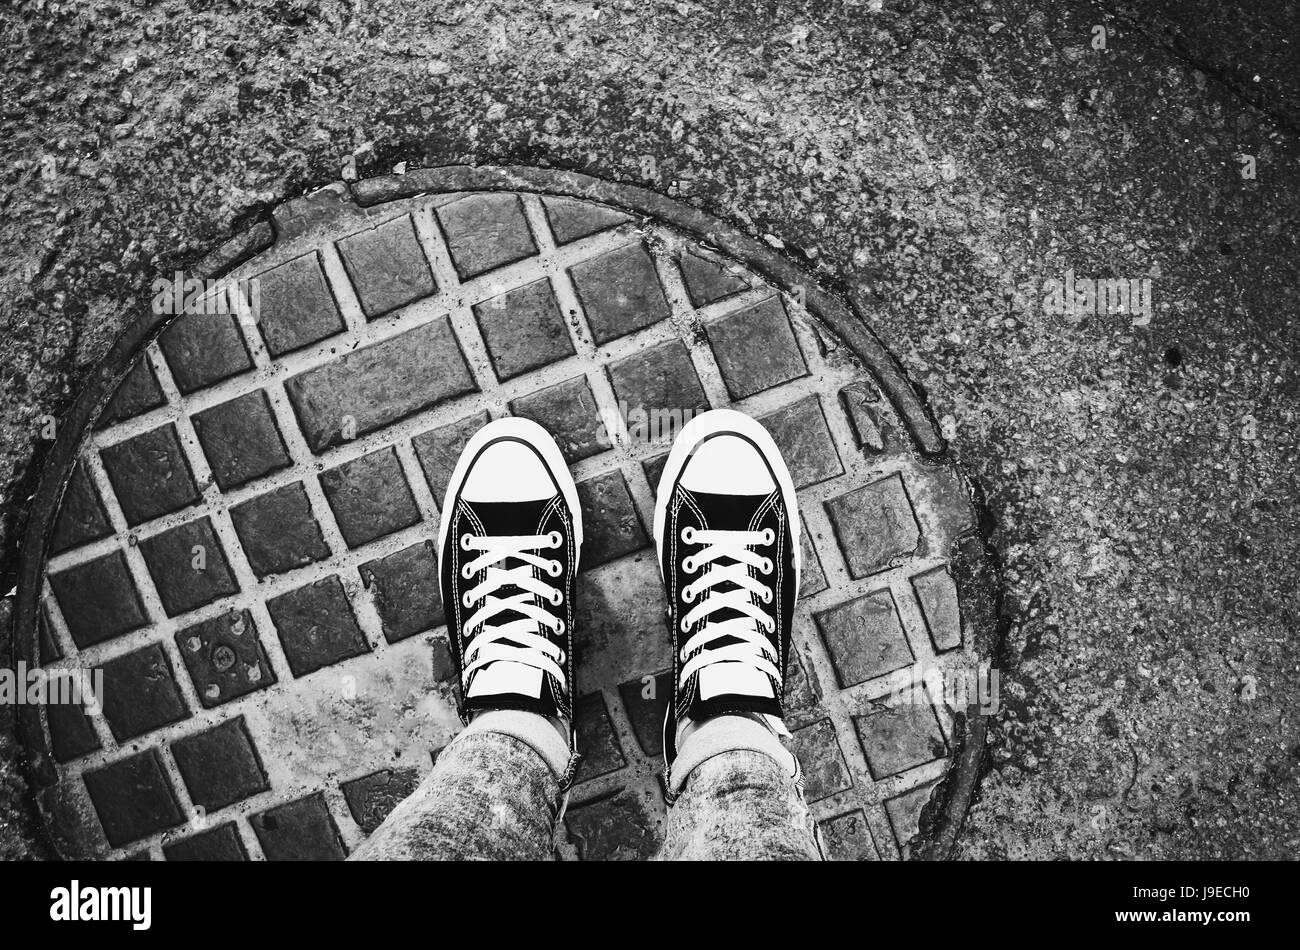 teenager feet in sneakers gumshoes standing an urban manhole cover J9ECH0